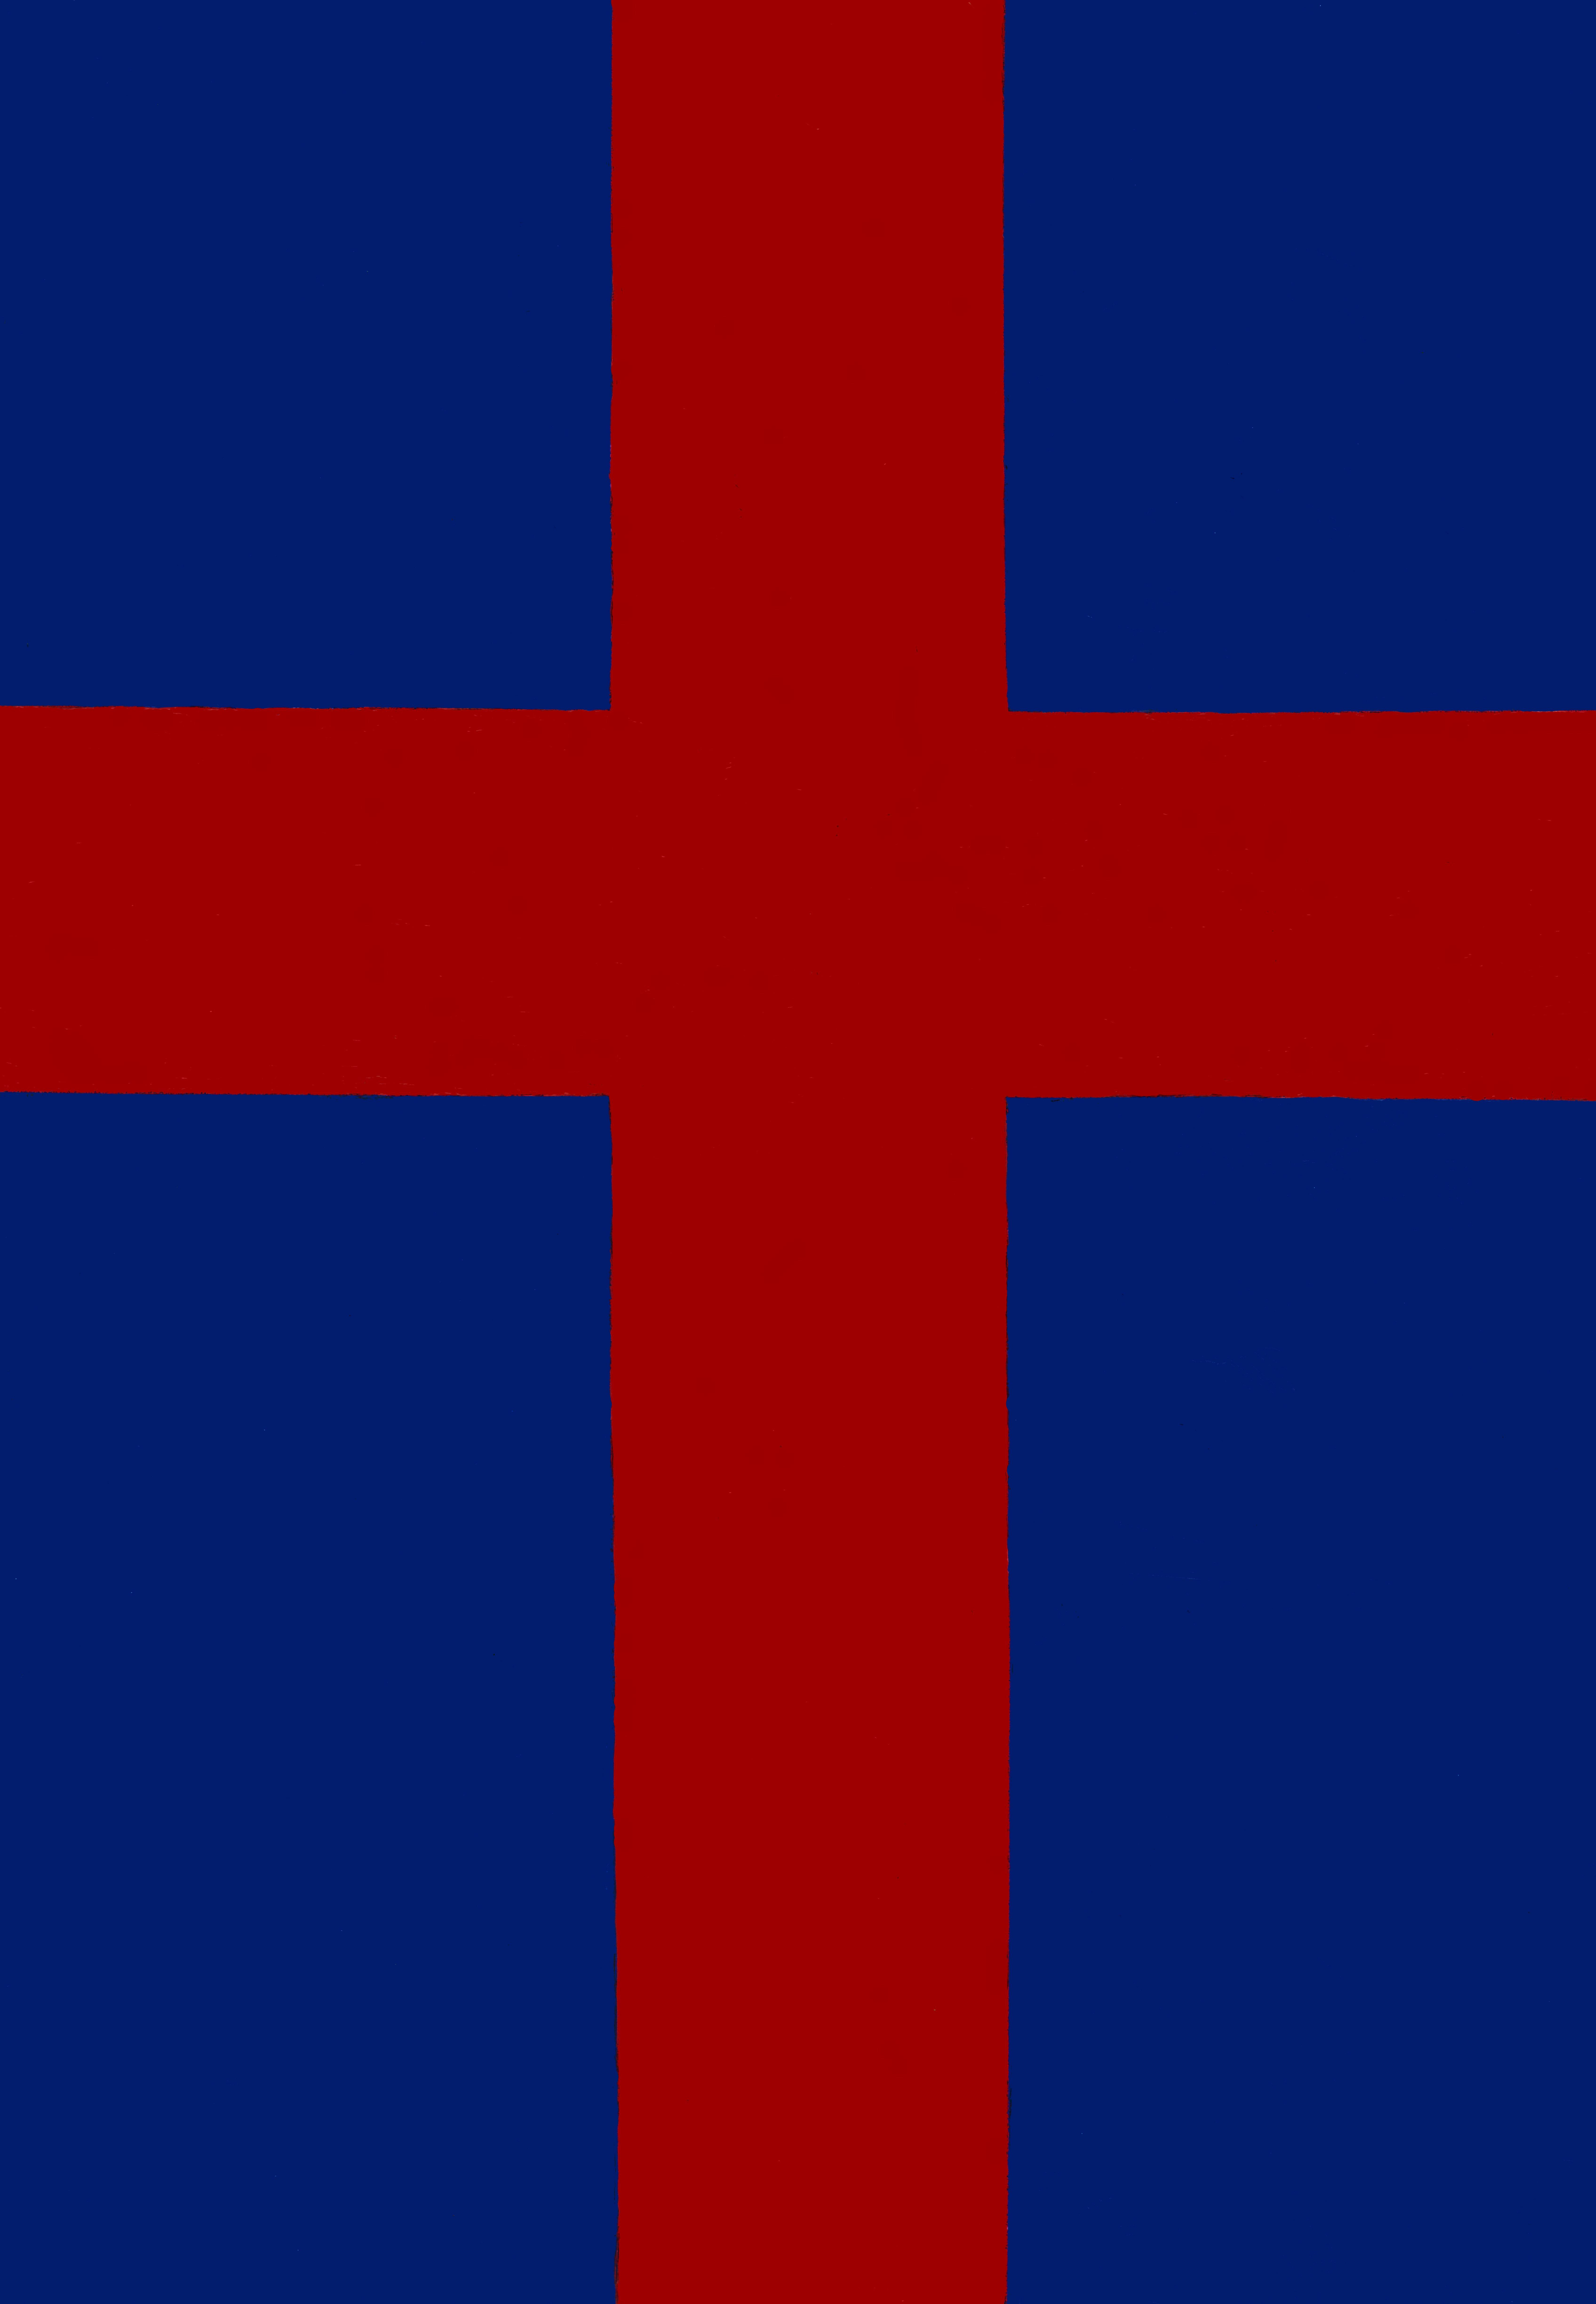 Blue Background Red Cross